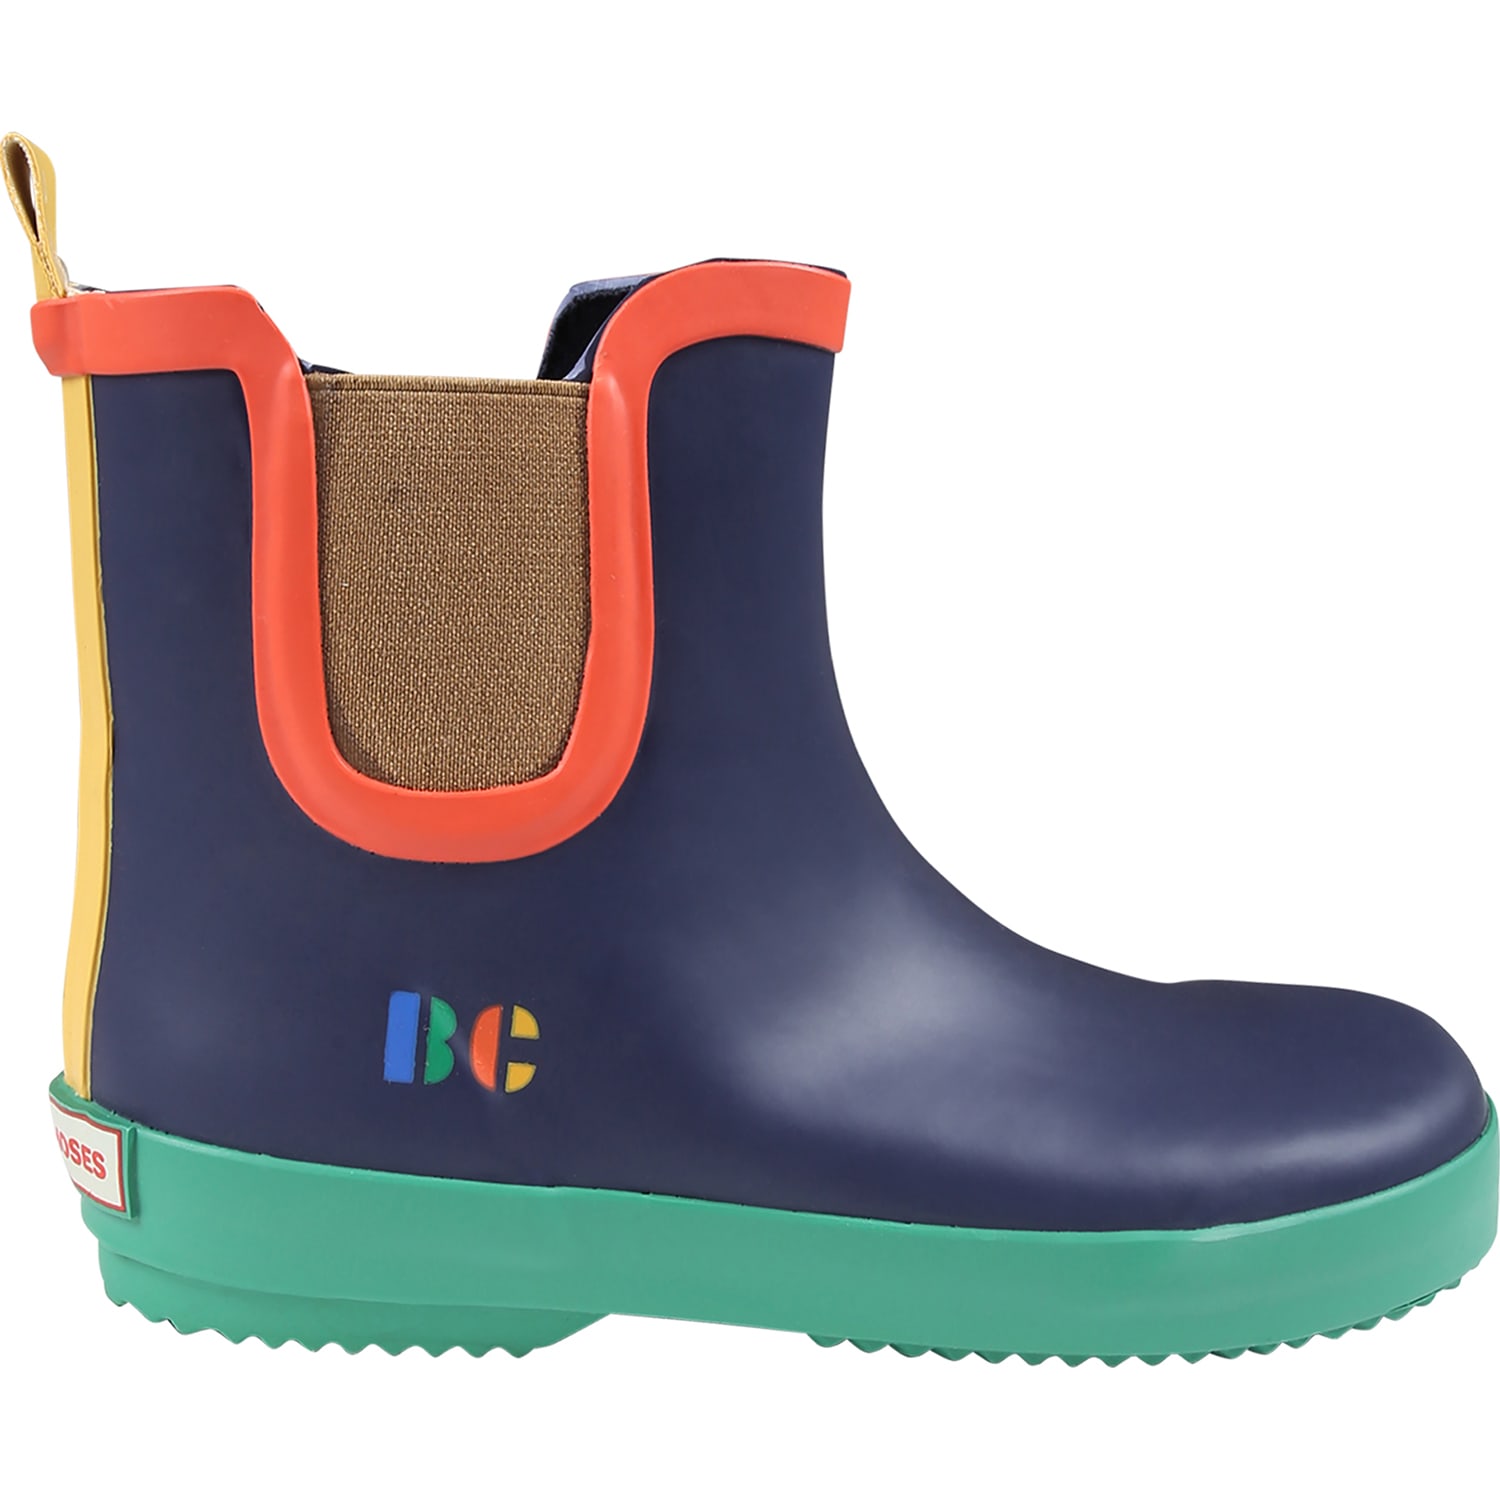 BOBO CHOSES BLUE RAIN BOOTS FOR KIDS WITH LOGO